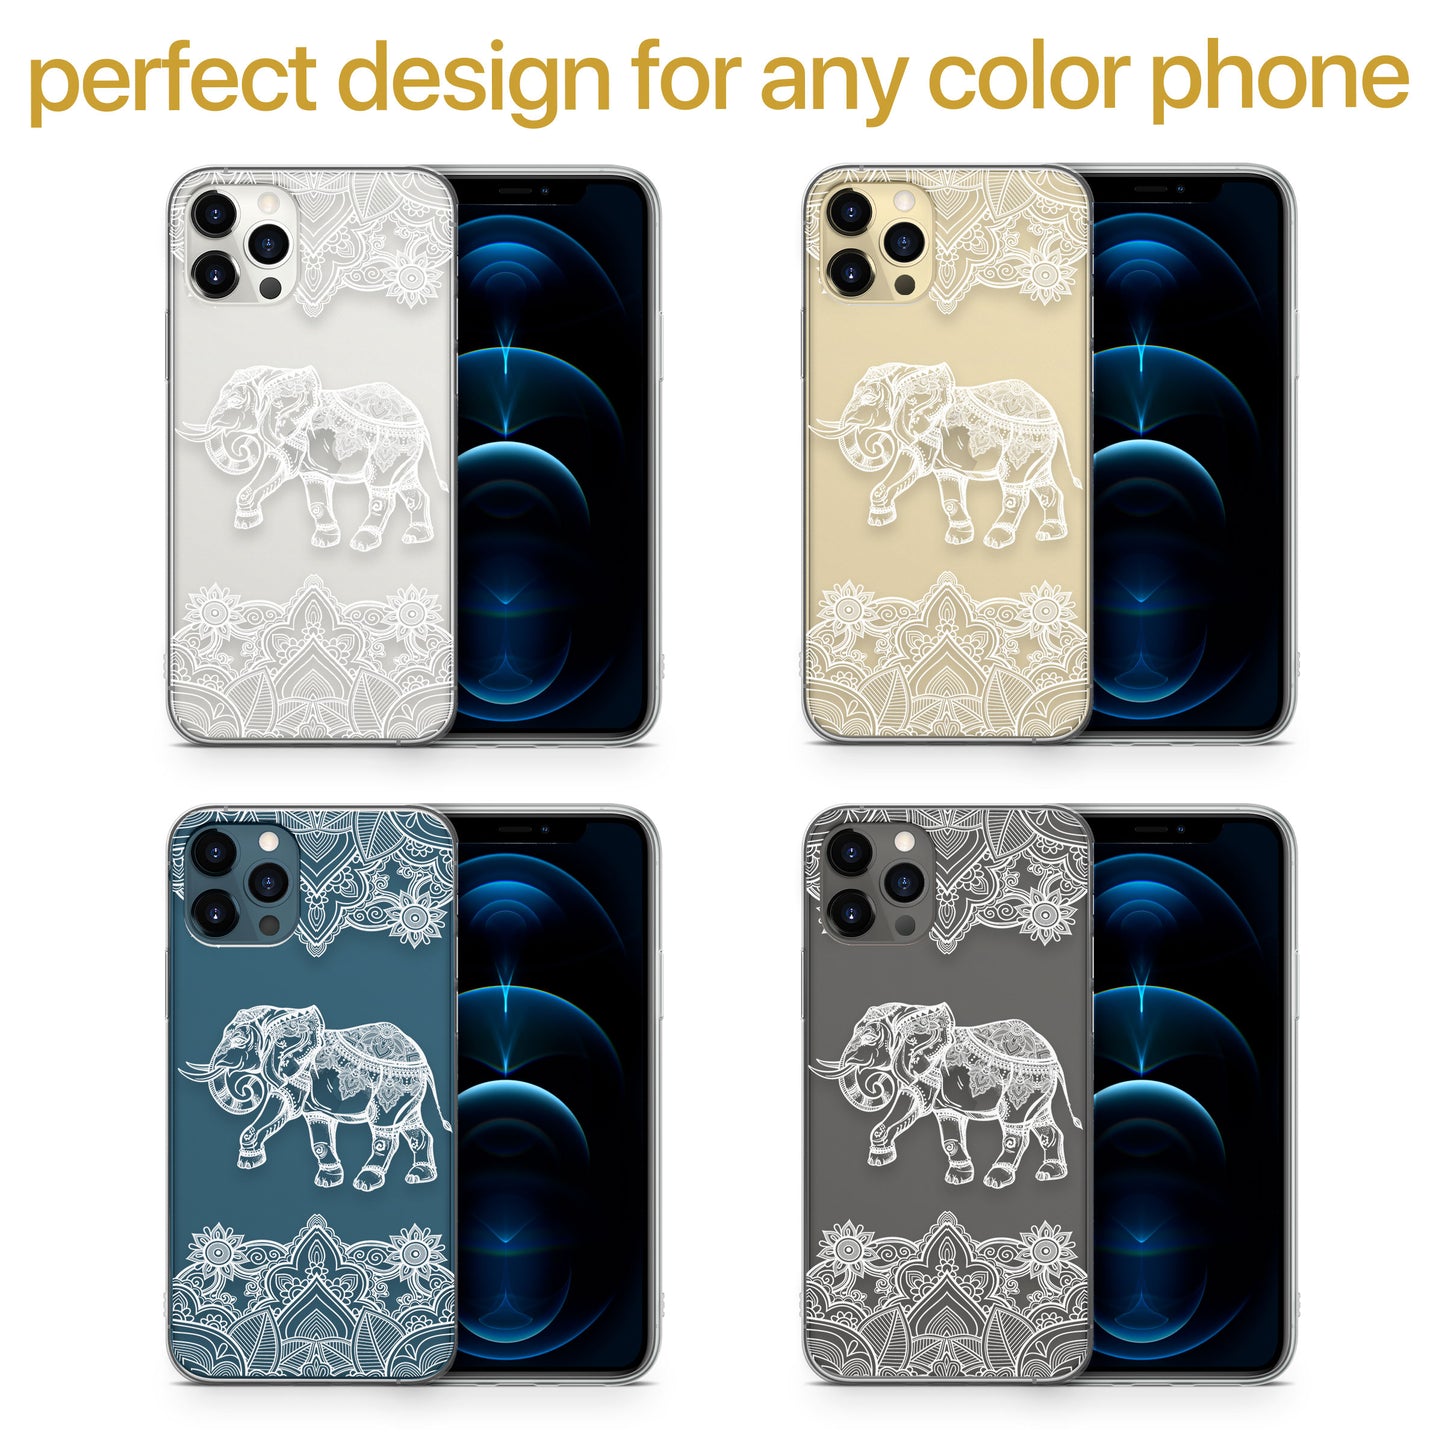 TPU Clear case with (Royal Elephant Mandala) Design for iPhone & Samsung Phones